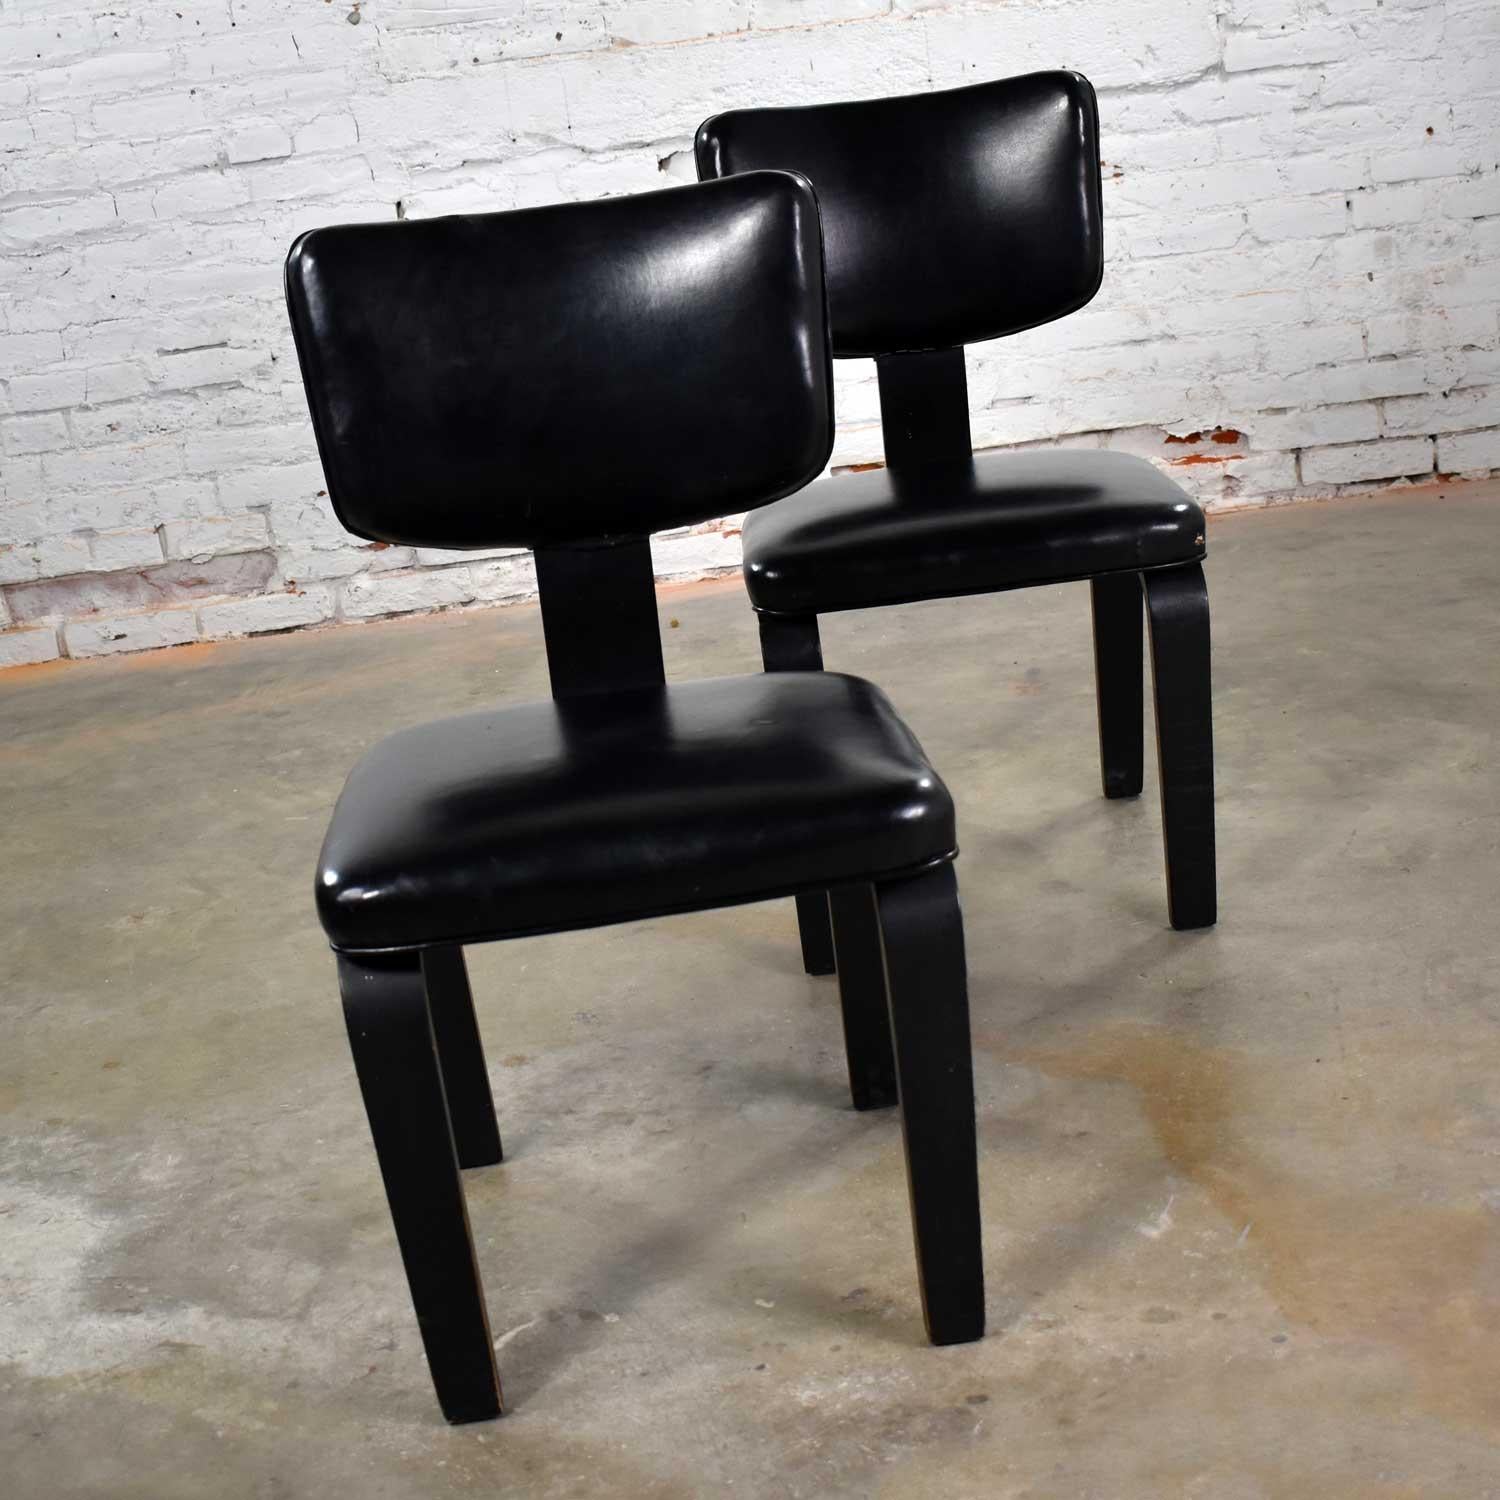 Handsome pair of Thonet bentwood Mid-Century Modern chairs in black with black vinyl upholstery. They are in good vintage condition. The vinyl does have a few cuts and nicks. The black painted wood shows age appropriate wear and patina. The